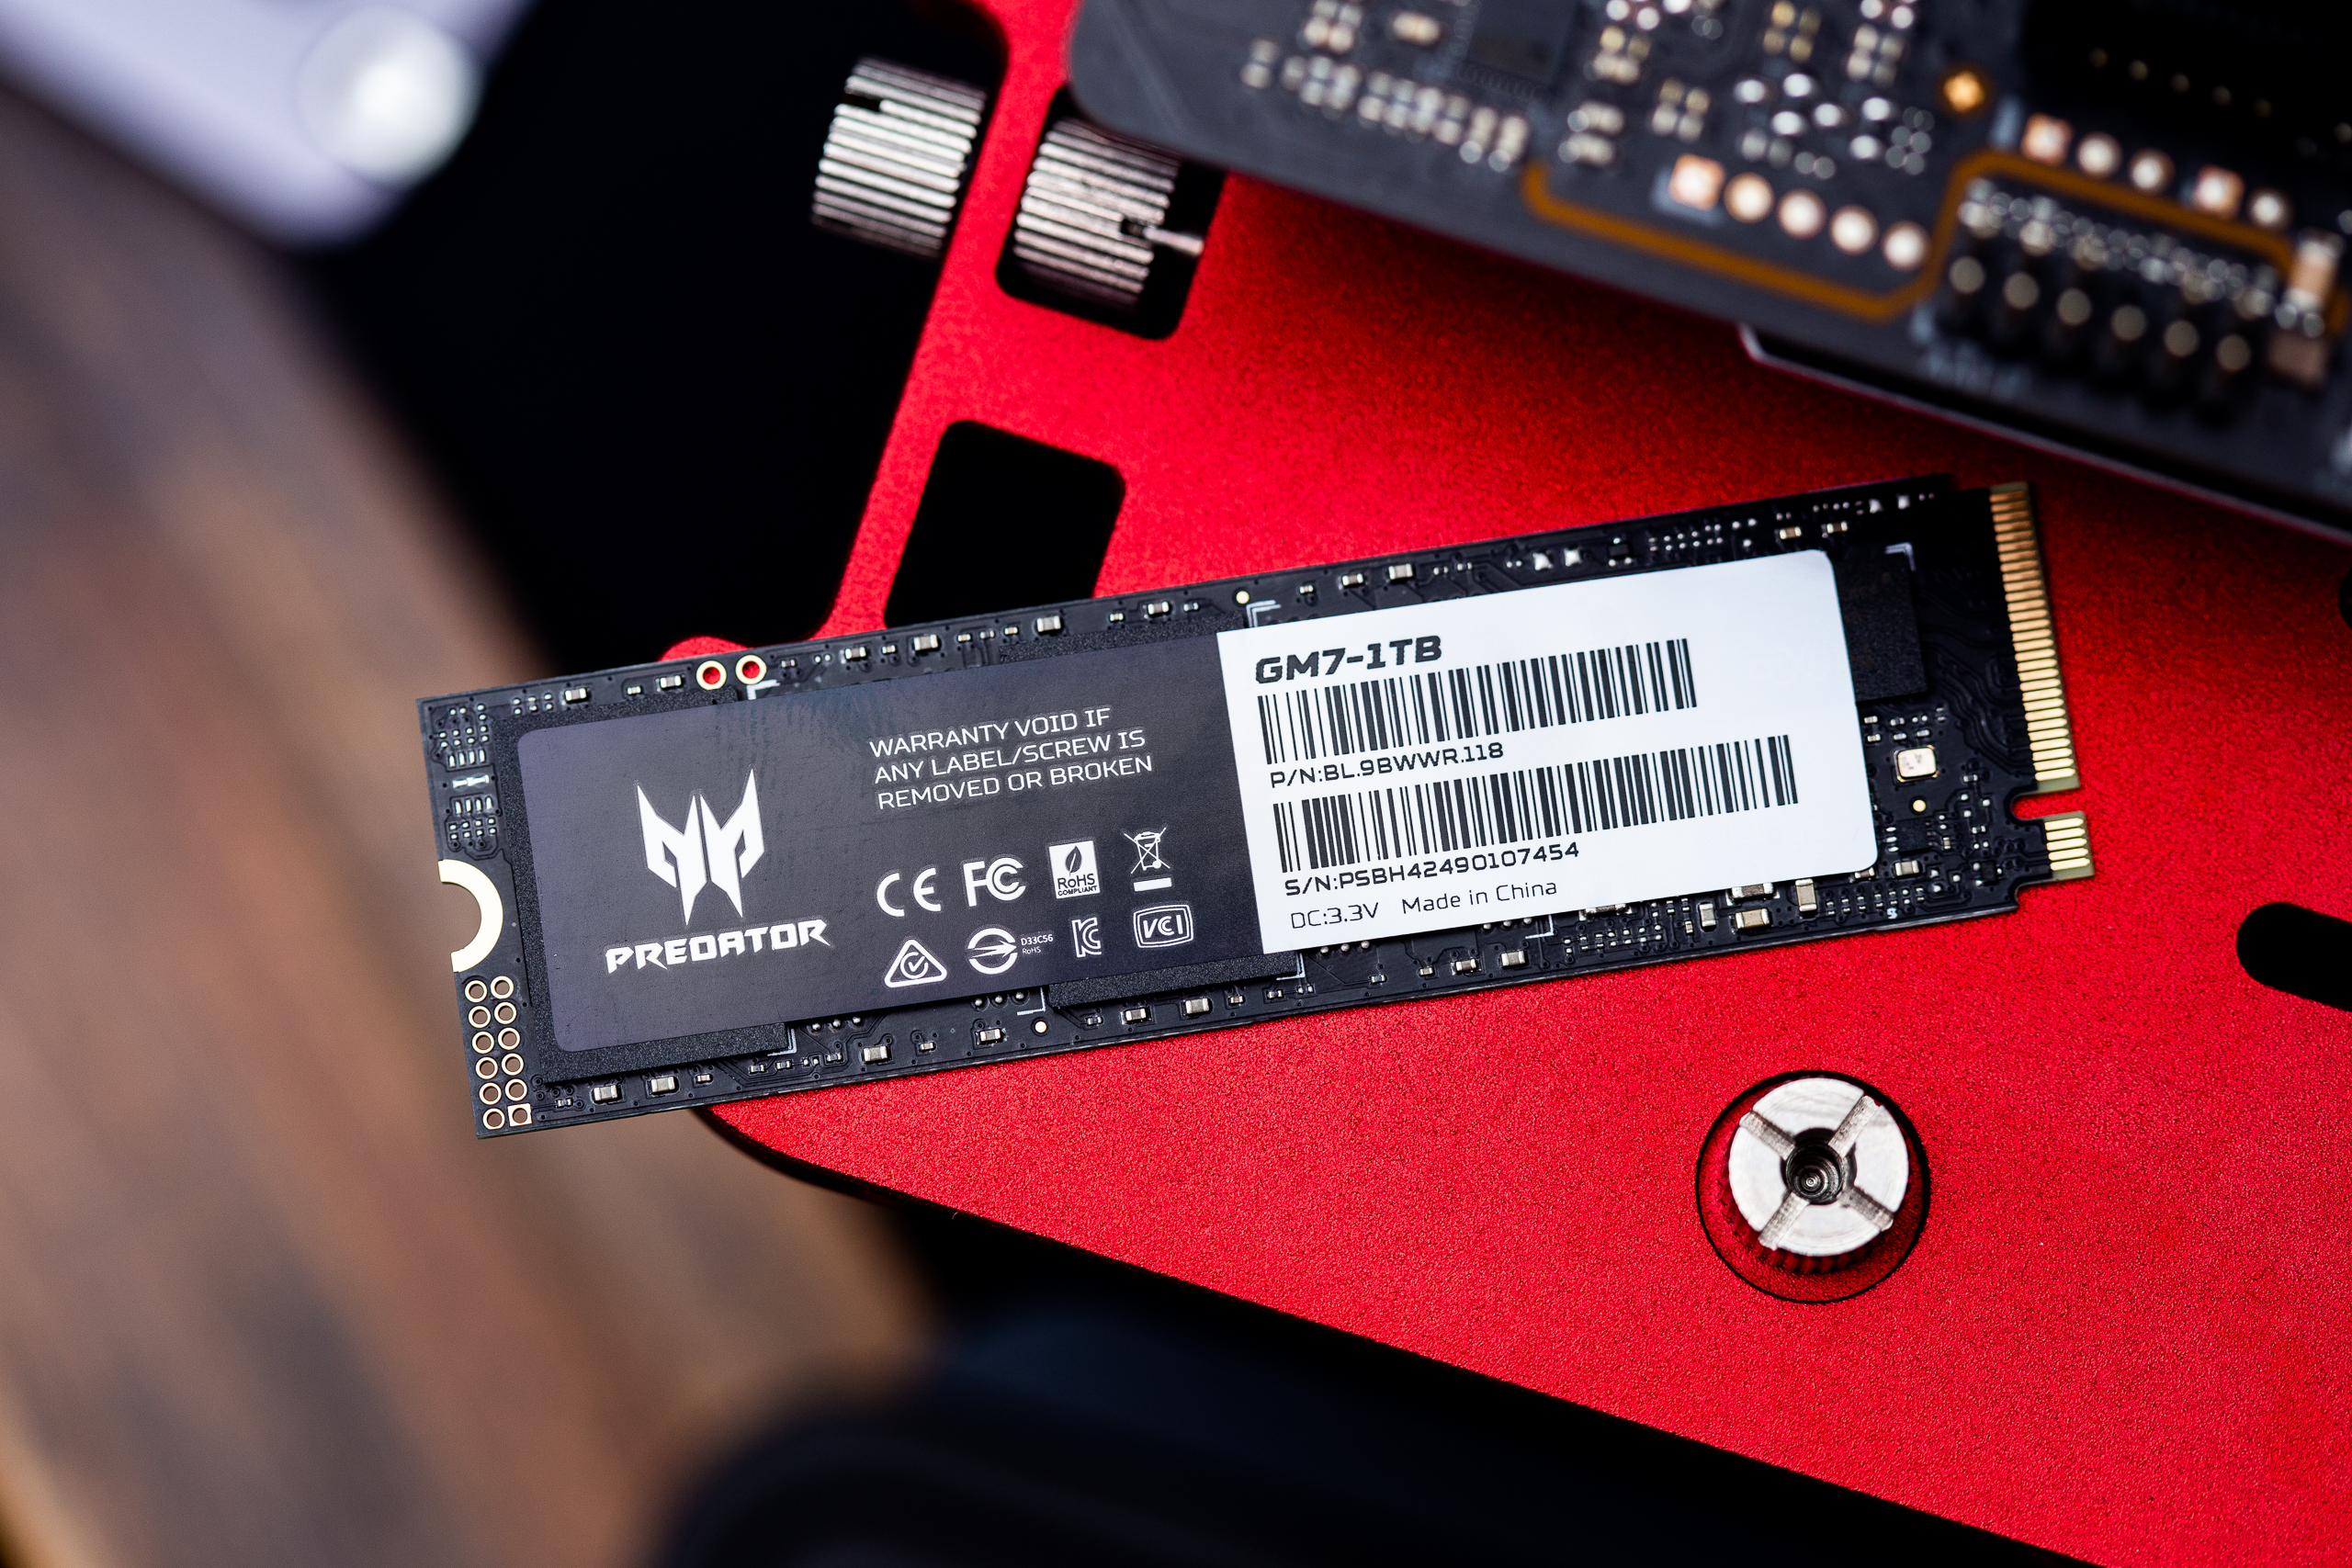 Silicon Power UD90 1 TB M.2 NVMe SSD Review